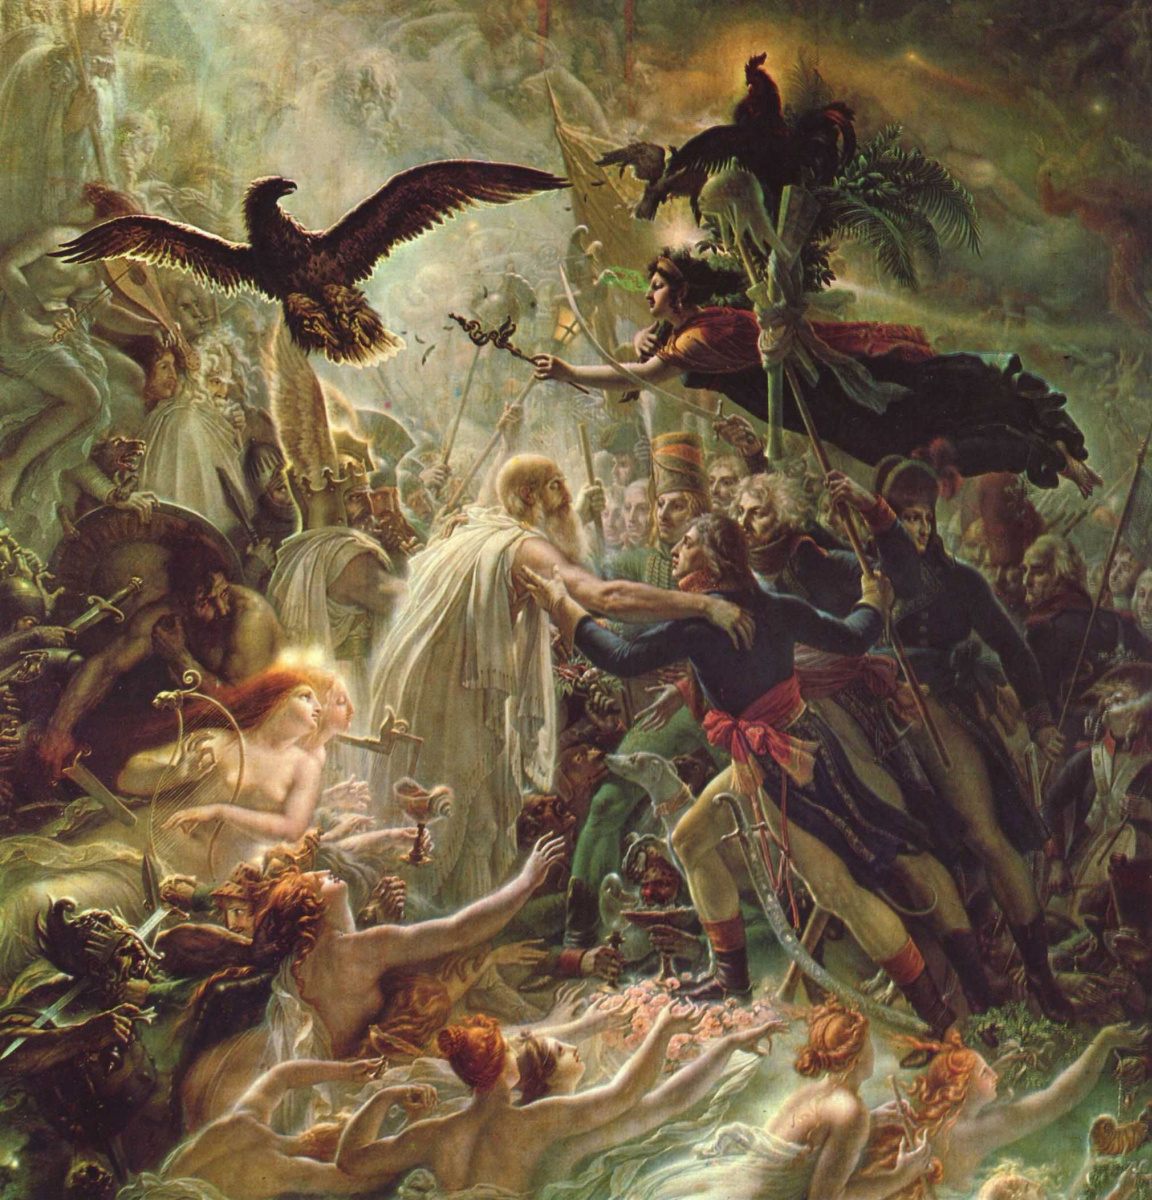 Anne-Louis Girode de Russi-Triosone. The apotheosis of the French heroes who died in the war for independence of the Motherland